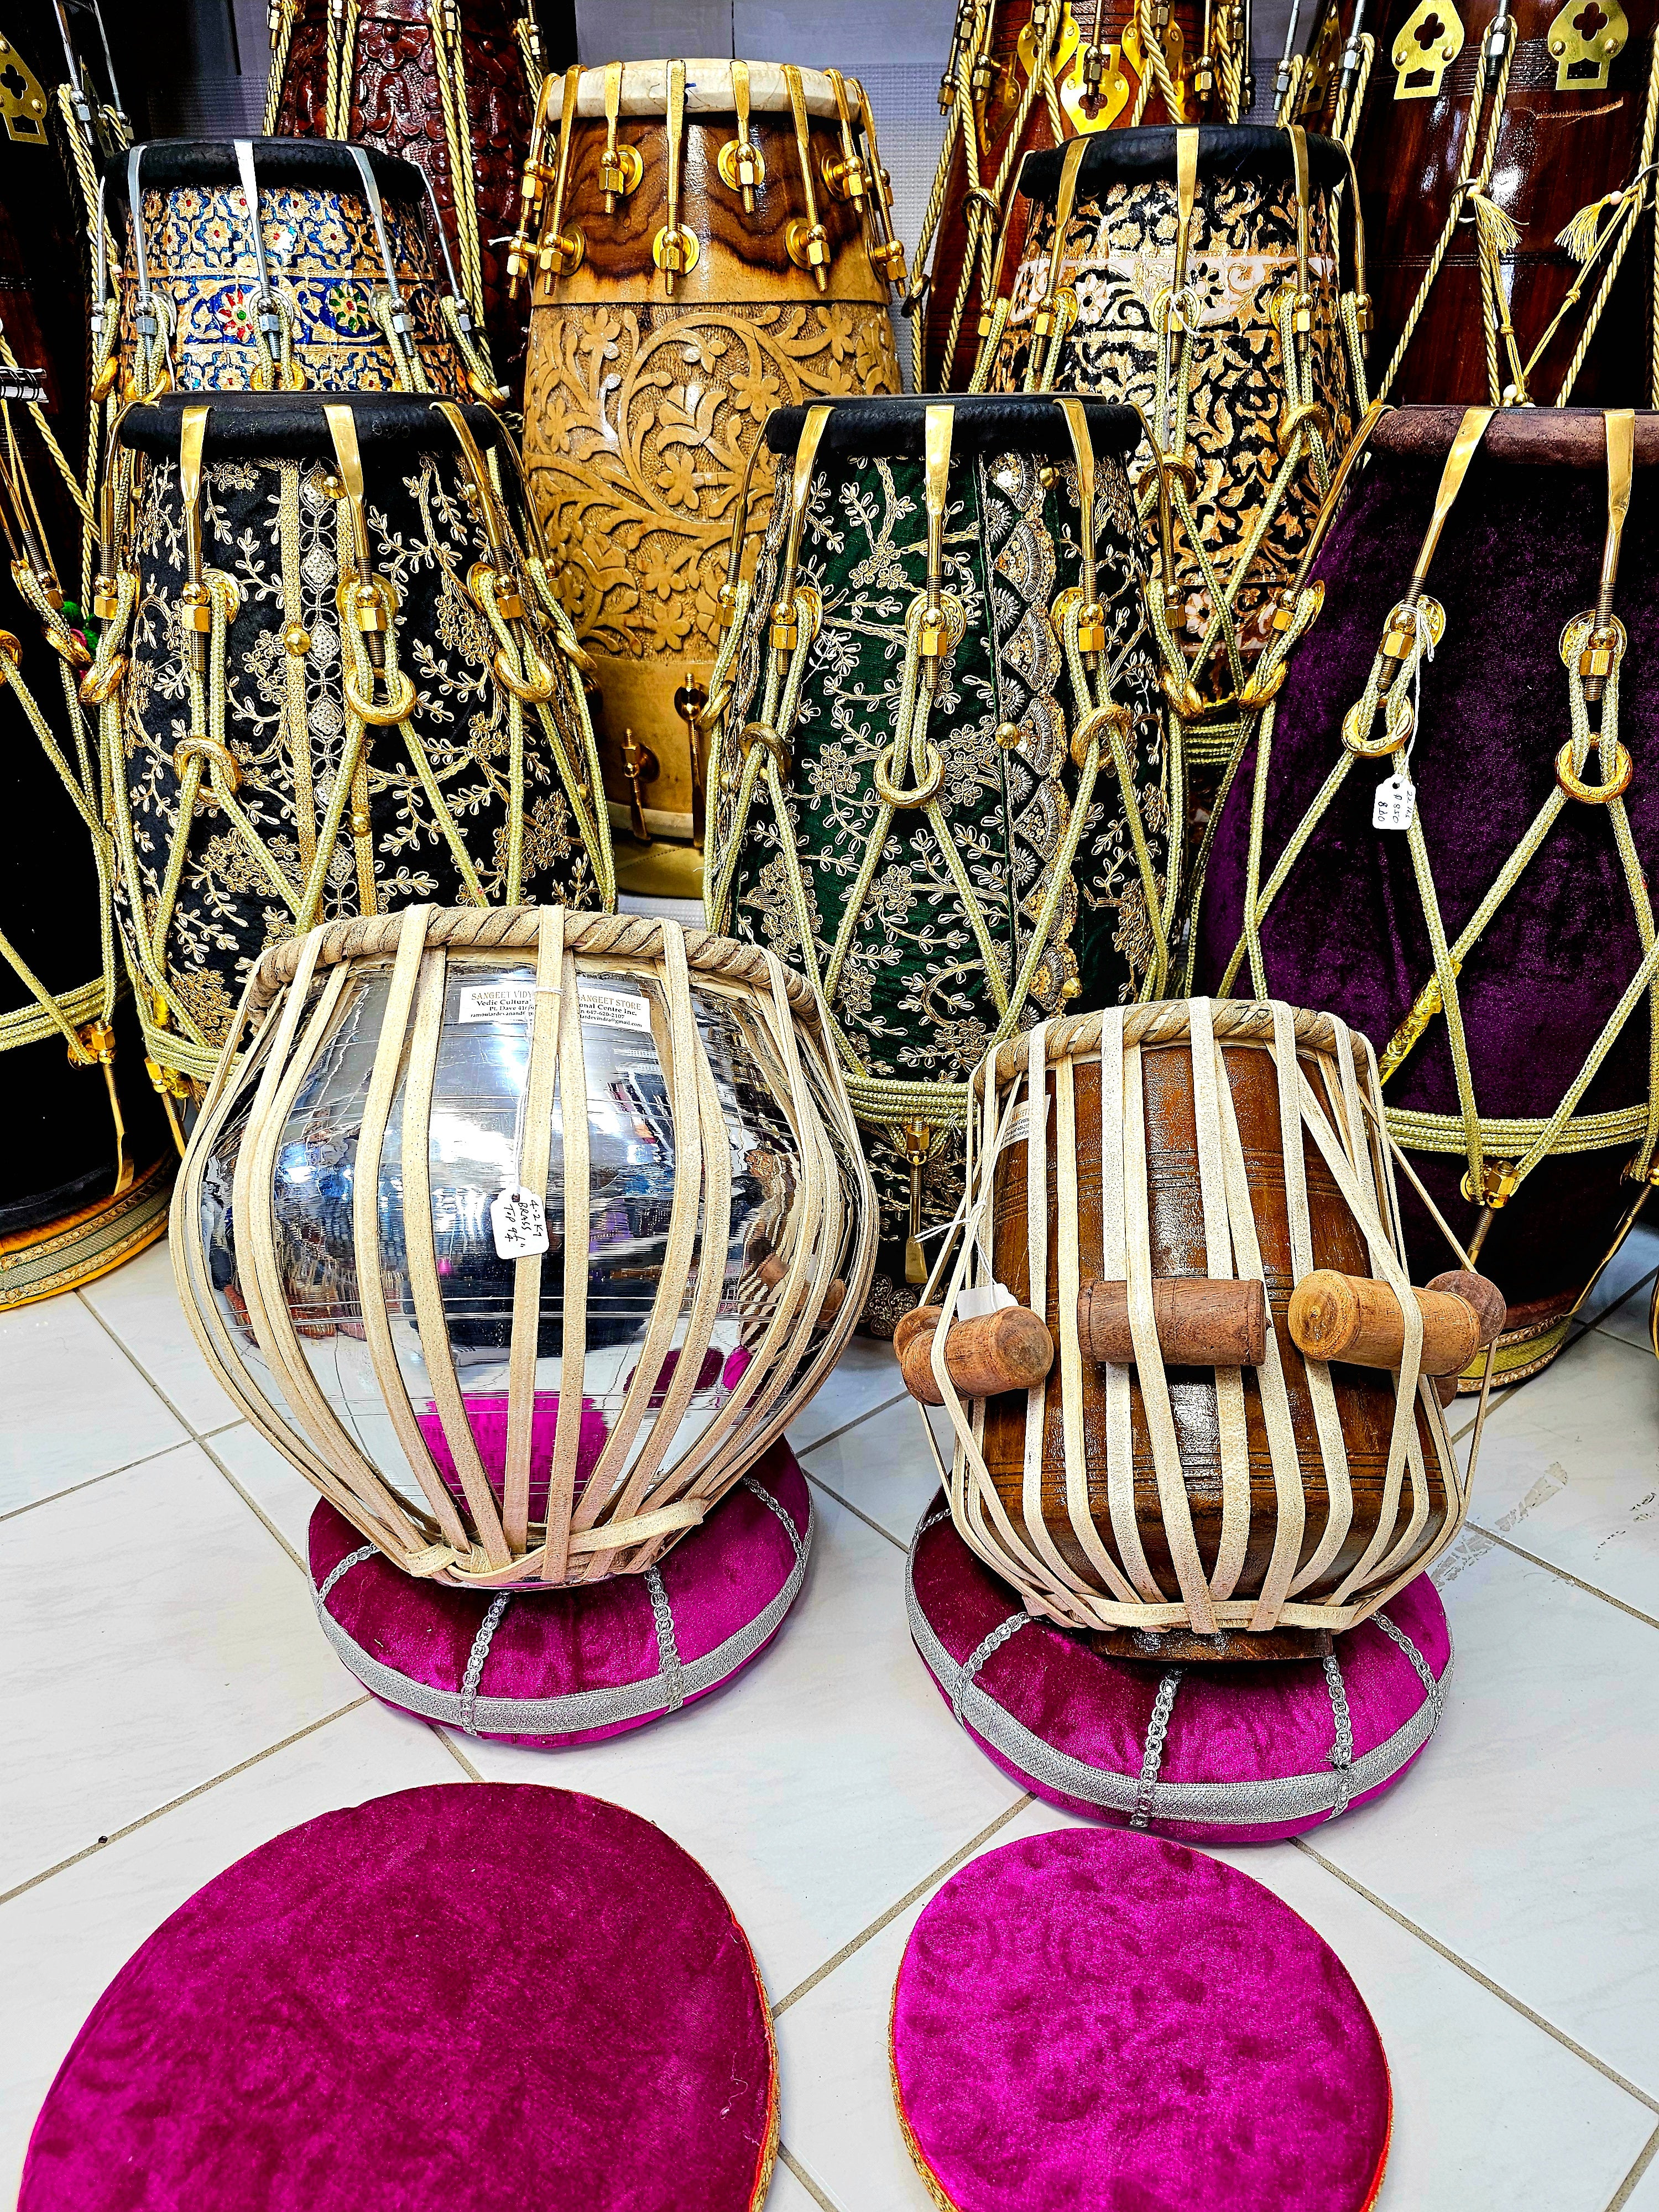 Resilient Echoes : 5.75" Red Sheesham C Dayan with Filled-in Crack + 9.25" 4.2kg Silver Brass Bayan Professional Tabla Set